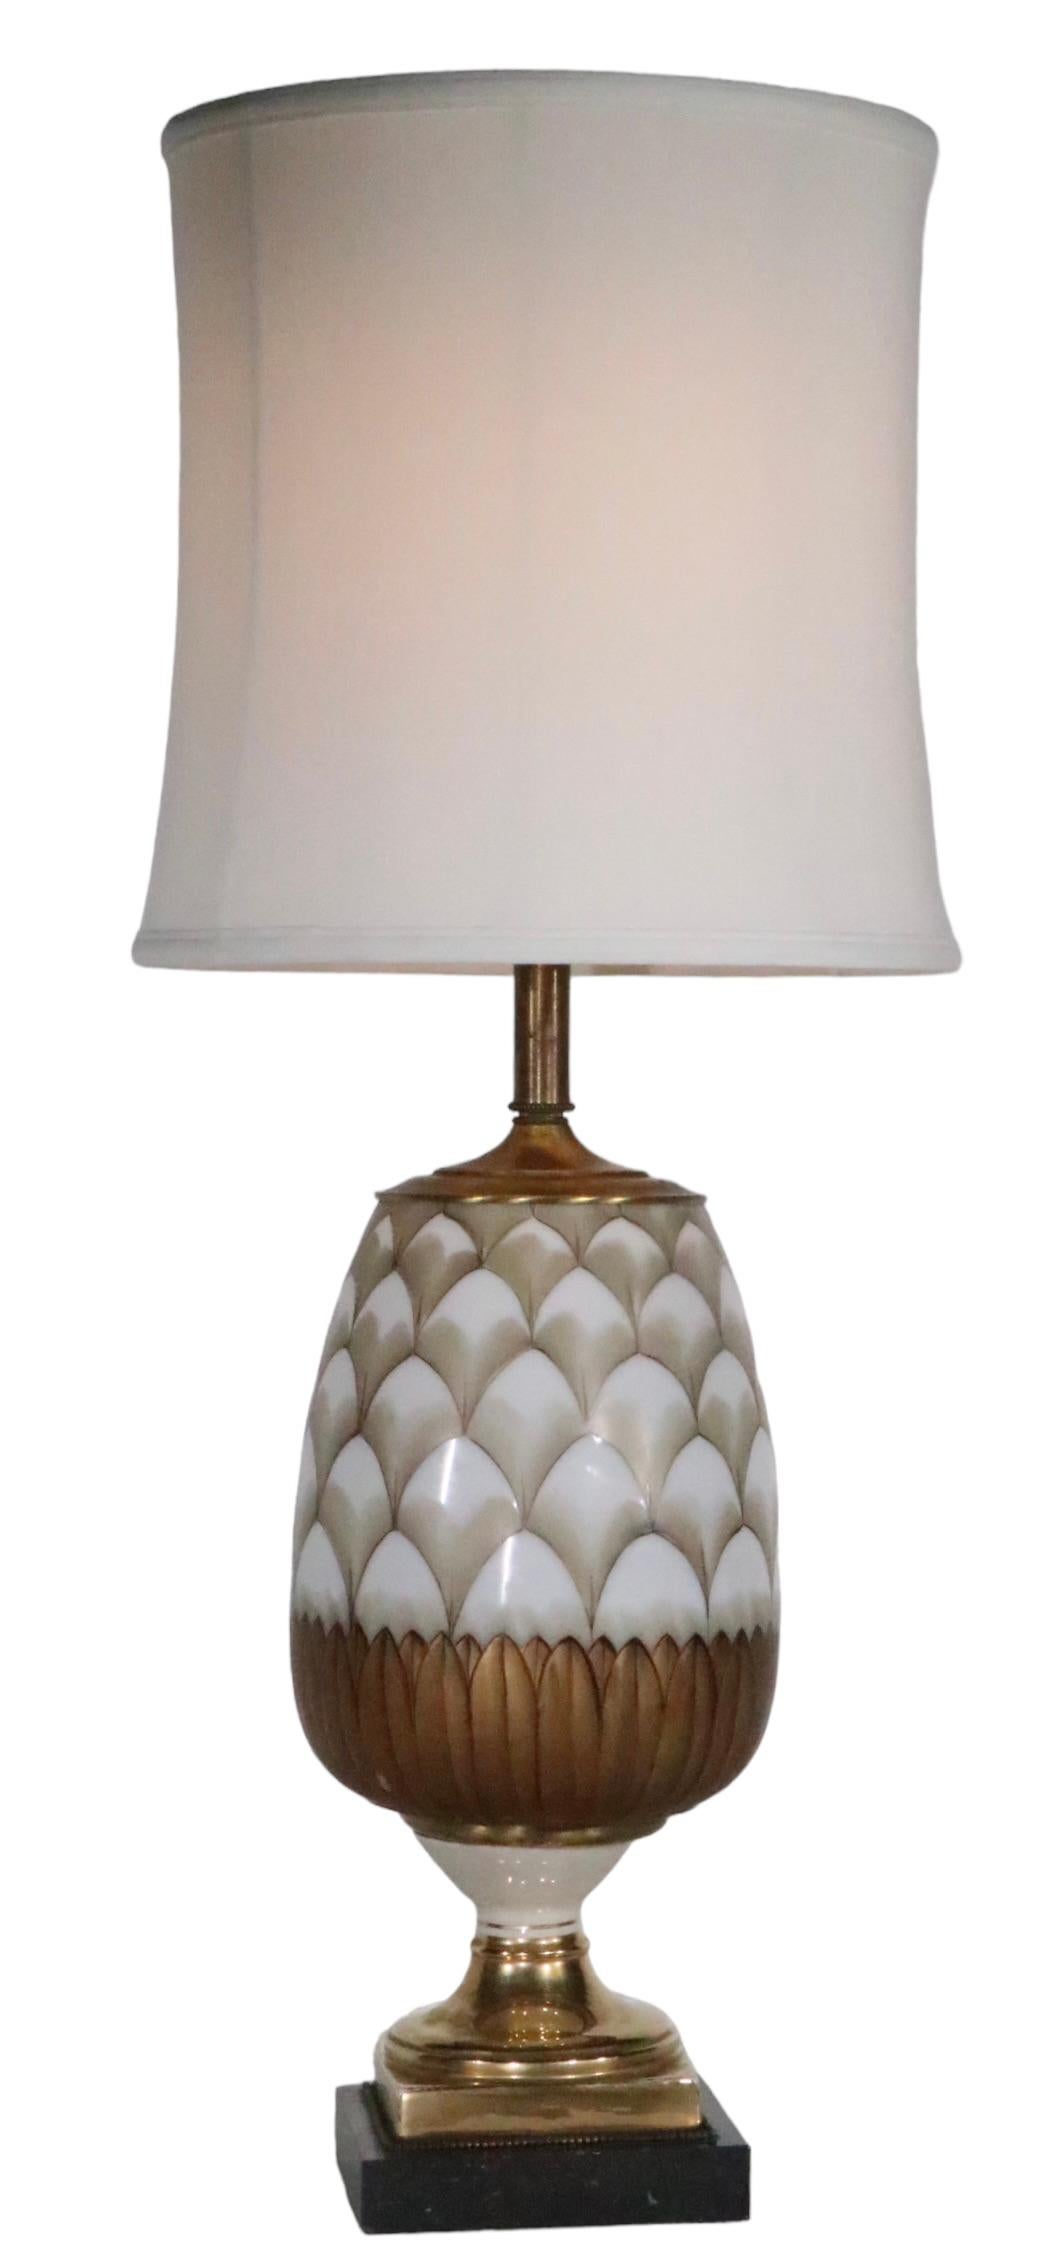 Neo Classical Hollywood Regency Table Lamp design att. to Tommi Parzinger 5